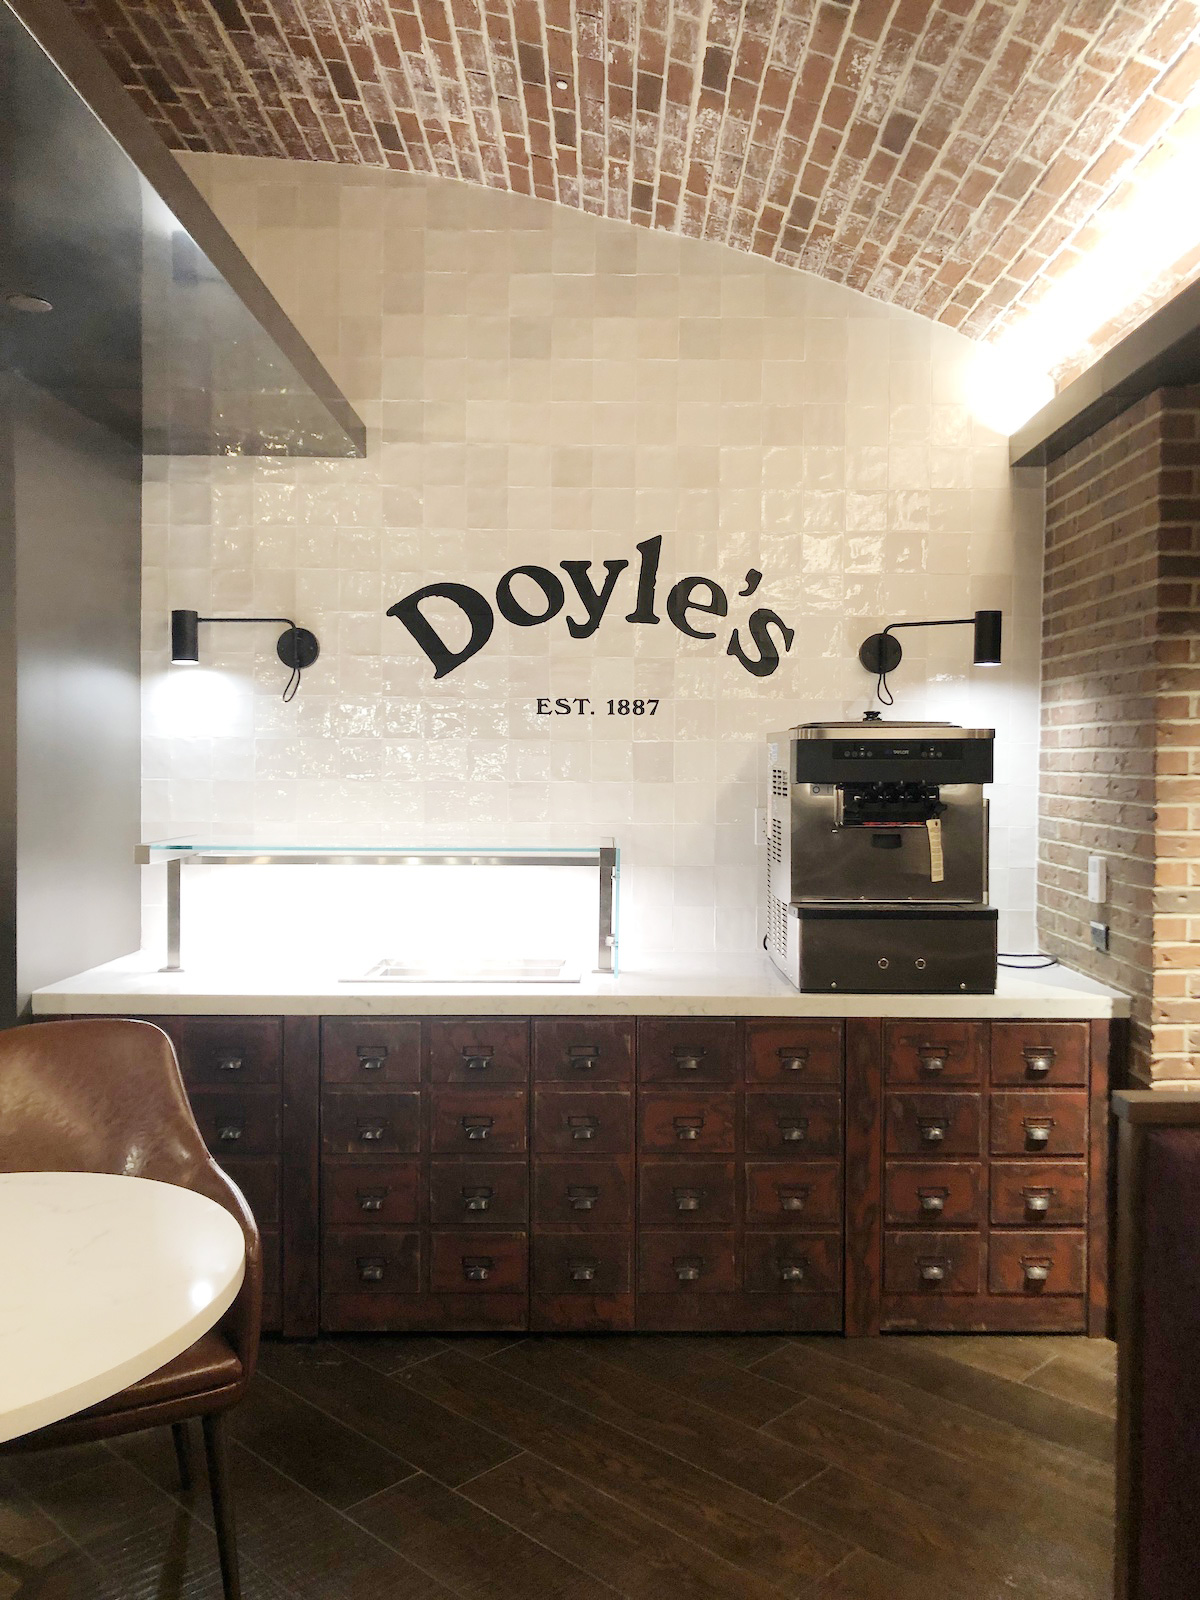 Interior shot of wall graphics at Doyle's Cafe